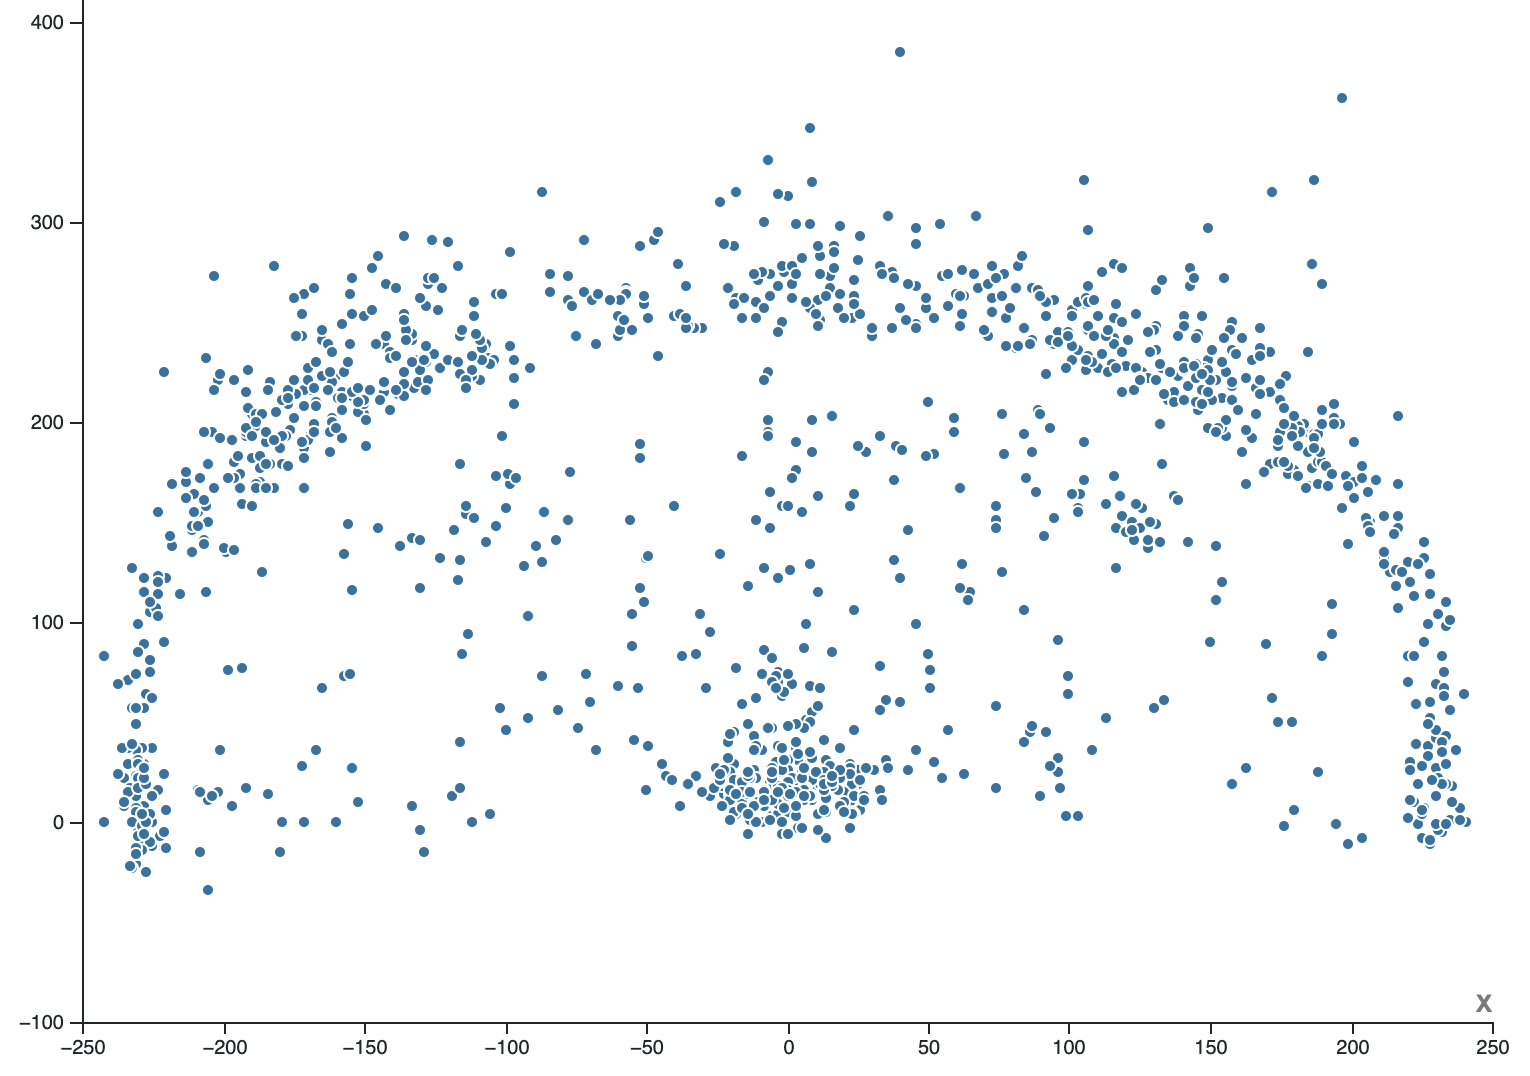 The same scatter plot as above, but with smaller dots, which reduces the overlap somewhat